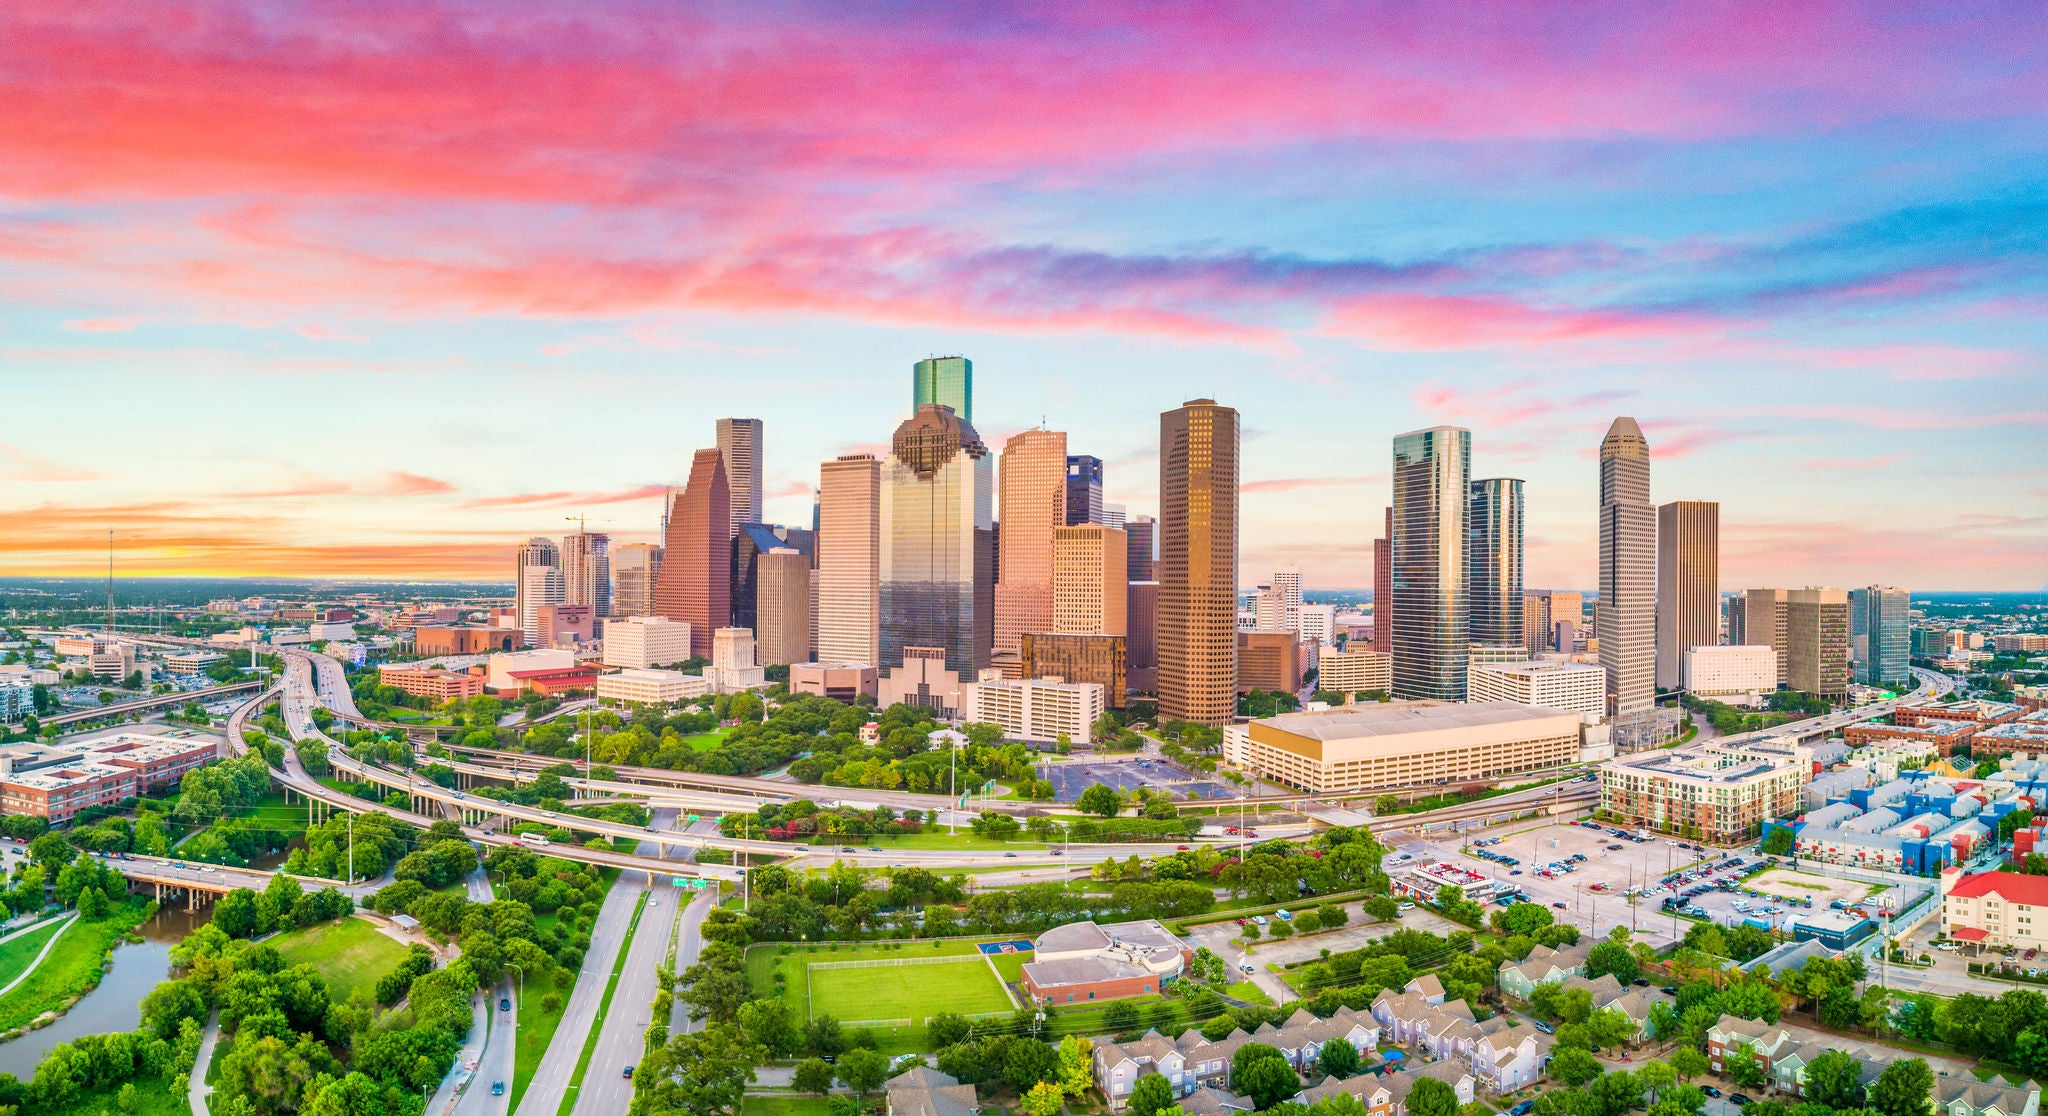 Aerial view of downtown Houston, Texas as seen at sunset.